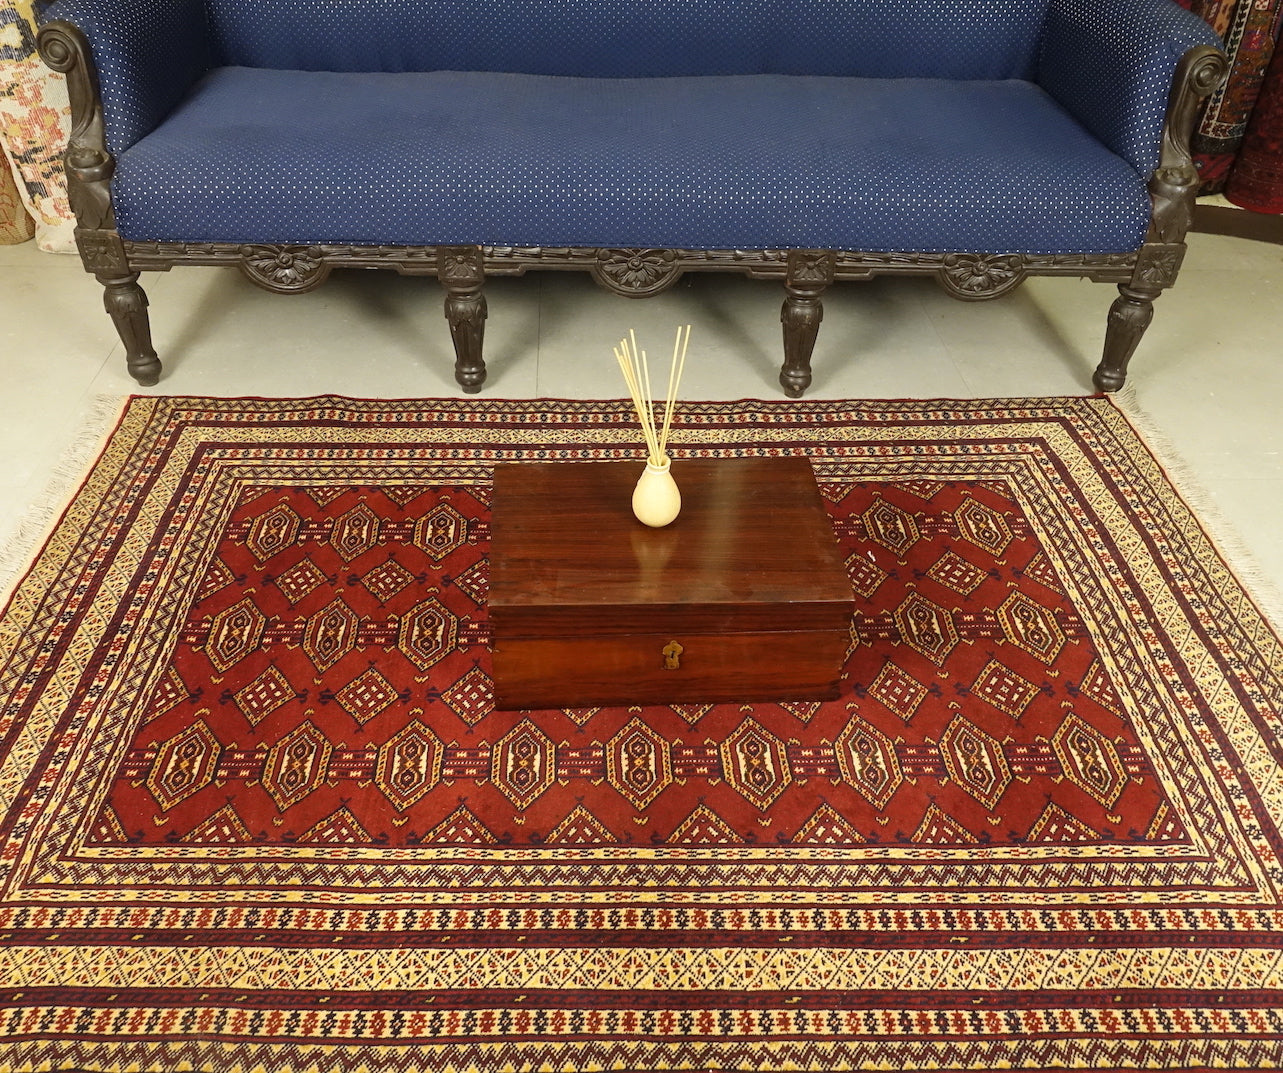 A 4 by 6 feet afghani wool rug. The colours used on the carpet are red, tan, deep blue and beige.